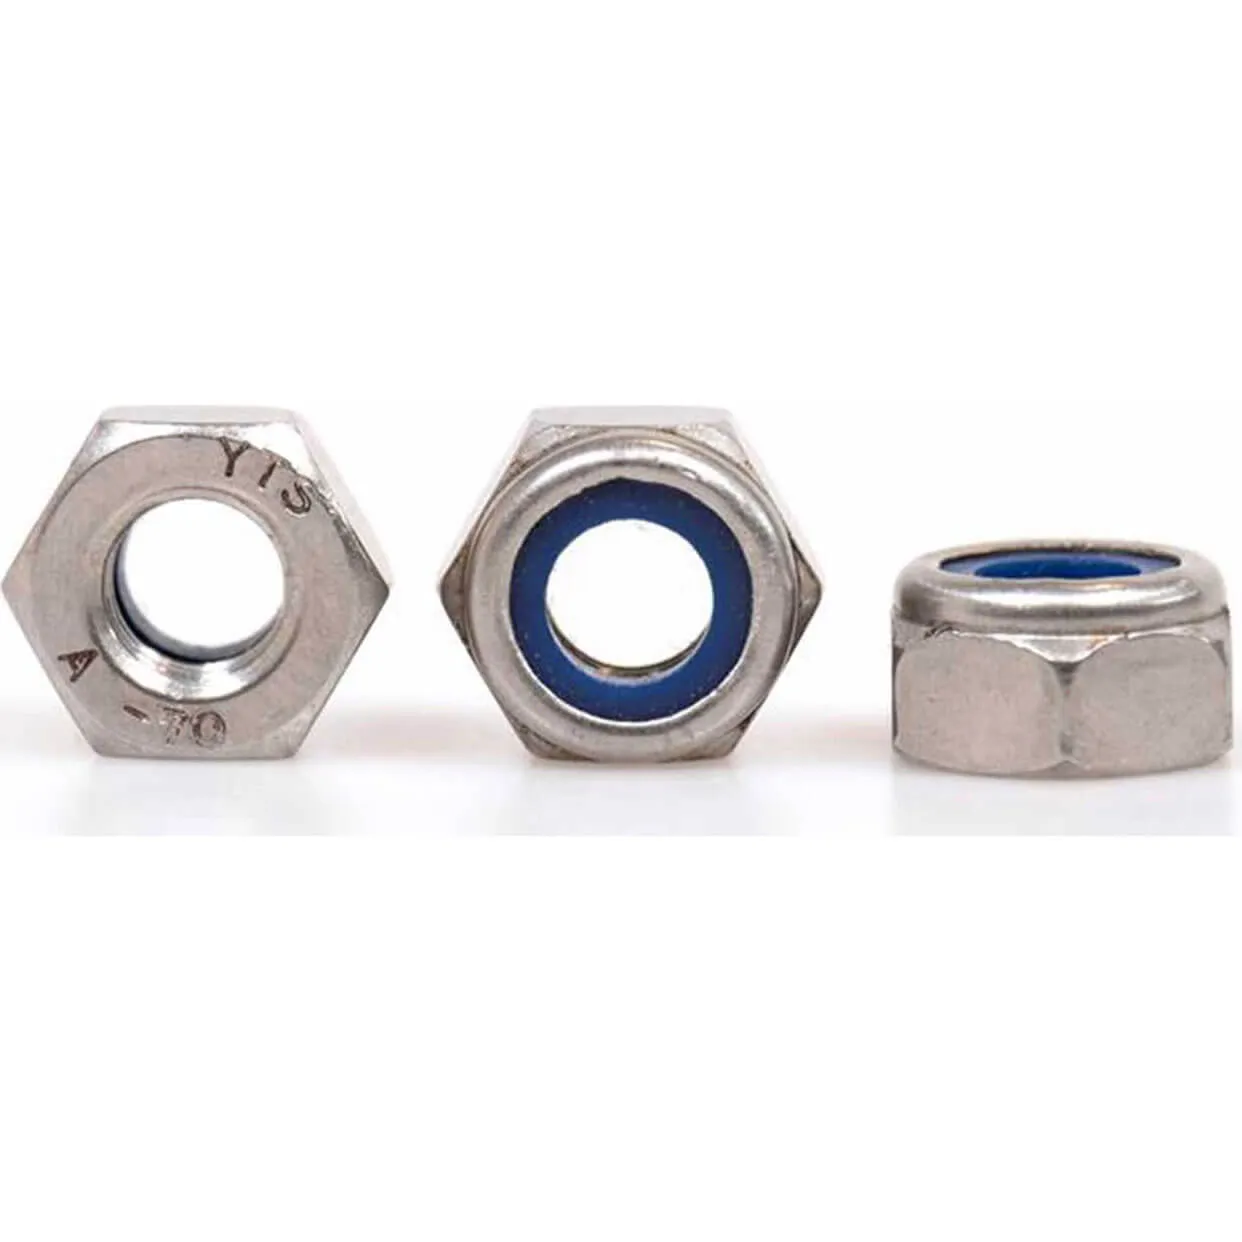 Sirius A4 316 Stainless Steel Nyloc Nuts - M20